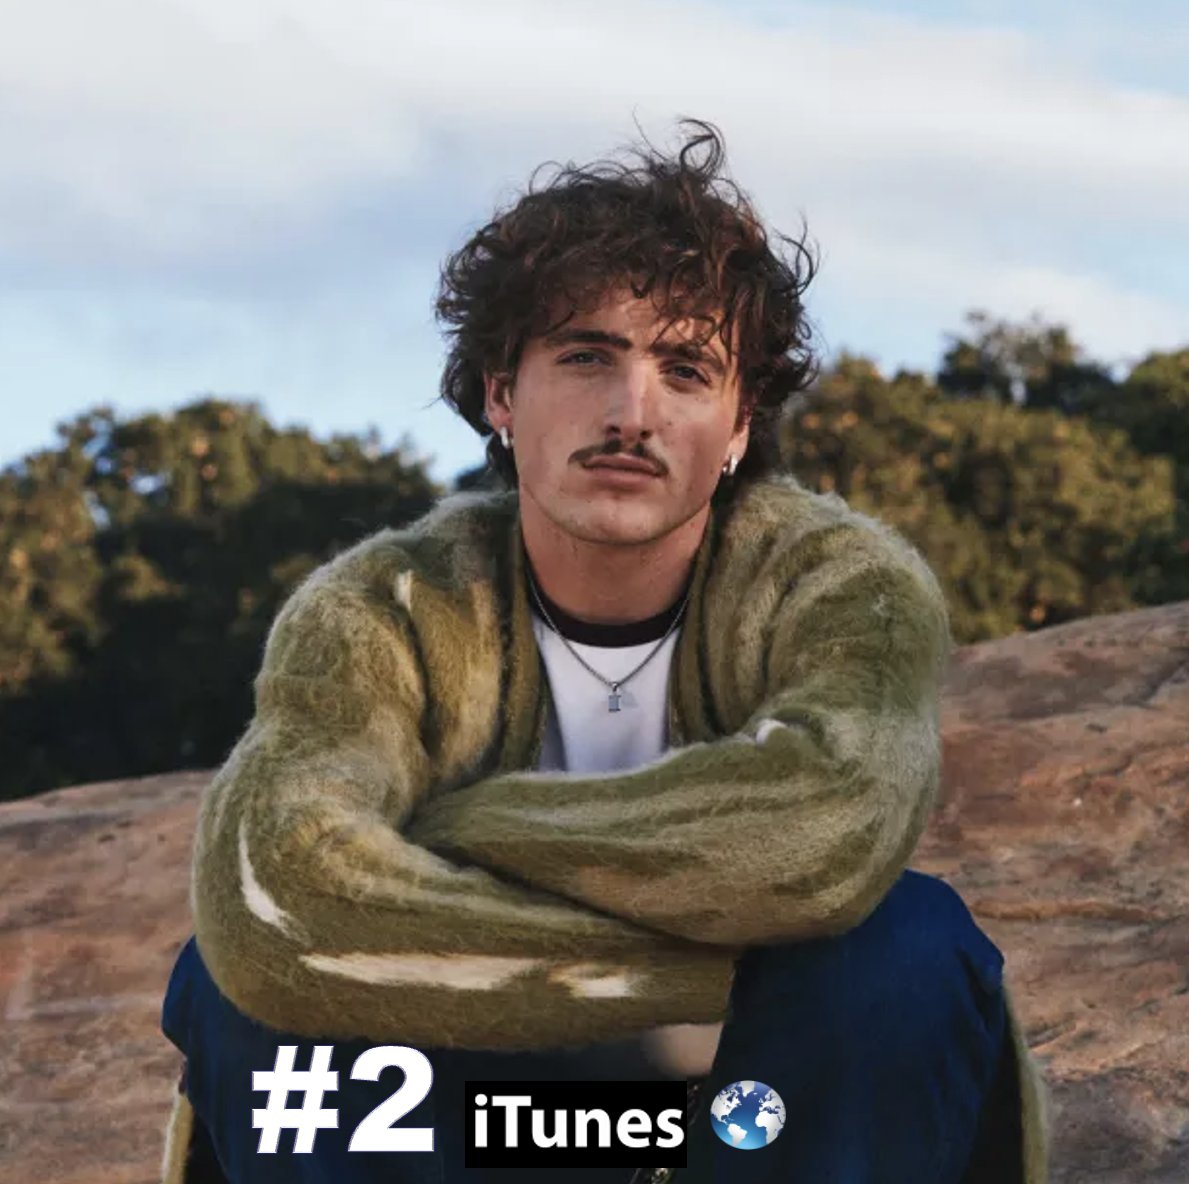 #BensonBoone's global smash hit 'Beautiful Things'  tops the European Apple Music song chart for a 68th day! 💪1⃣🇪🇺🍎🎼🎶📈✖️6⃣8⃣🕛🔥👑🧡

The song is #2 on the Worldwide iTunes song chart after 19 days at #1 and holds at #3 on the European iTunes song chart after 5 days at #1!…